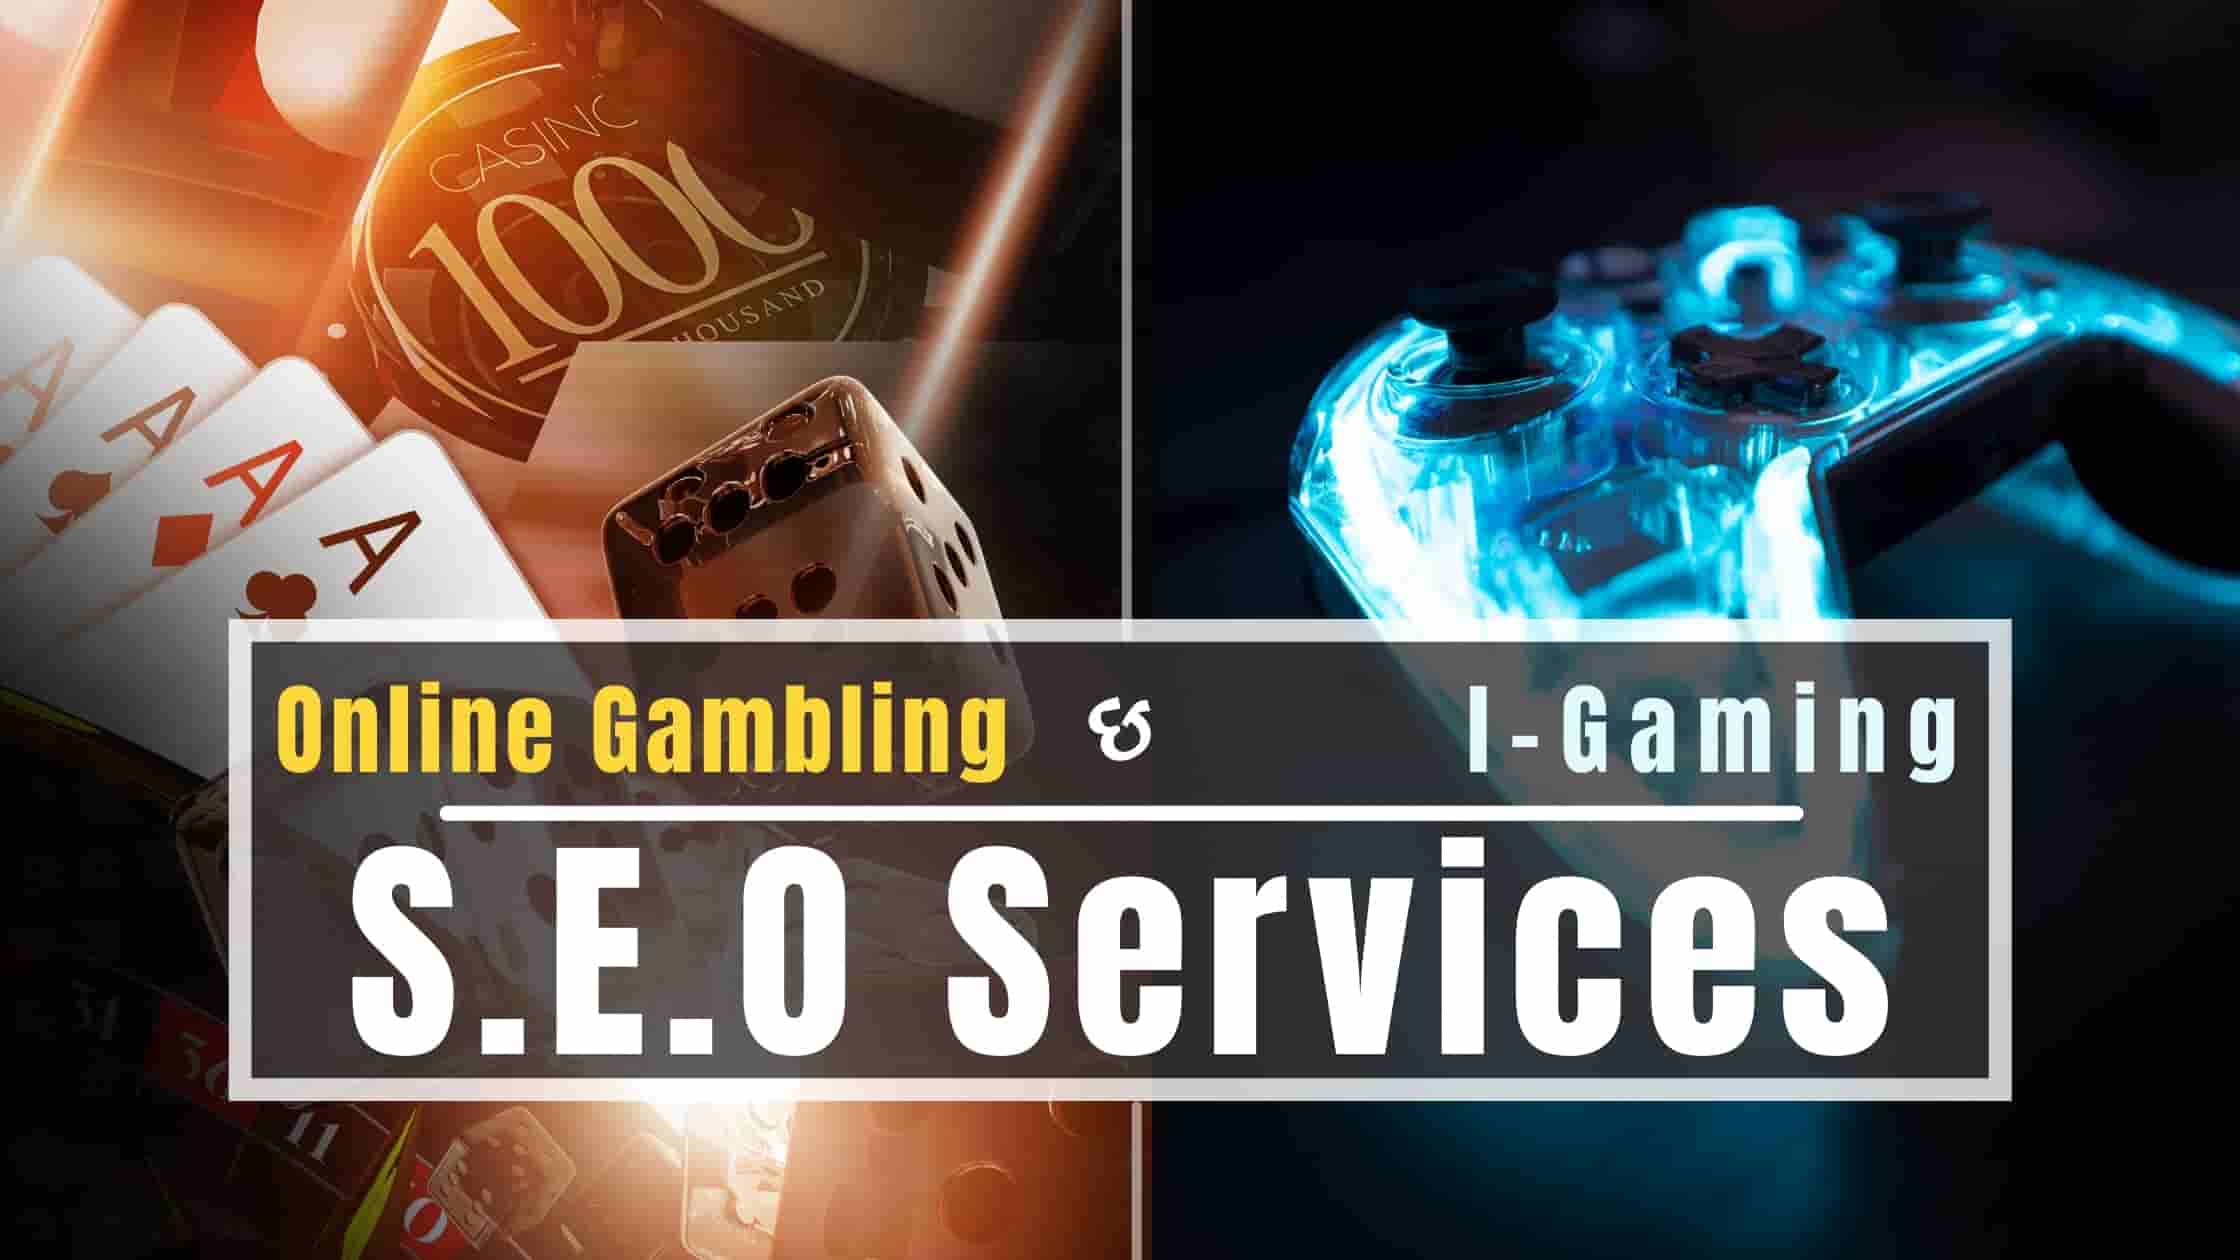 igaming and casino SEO